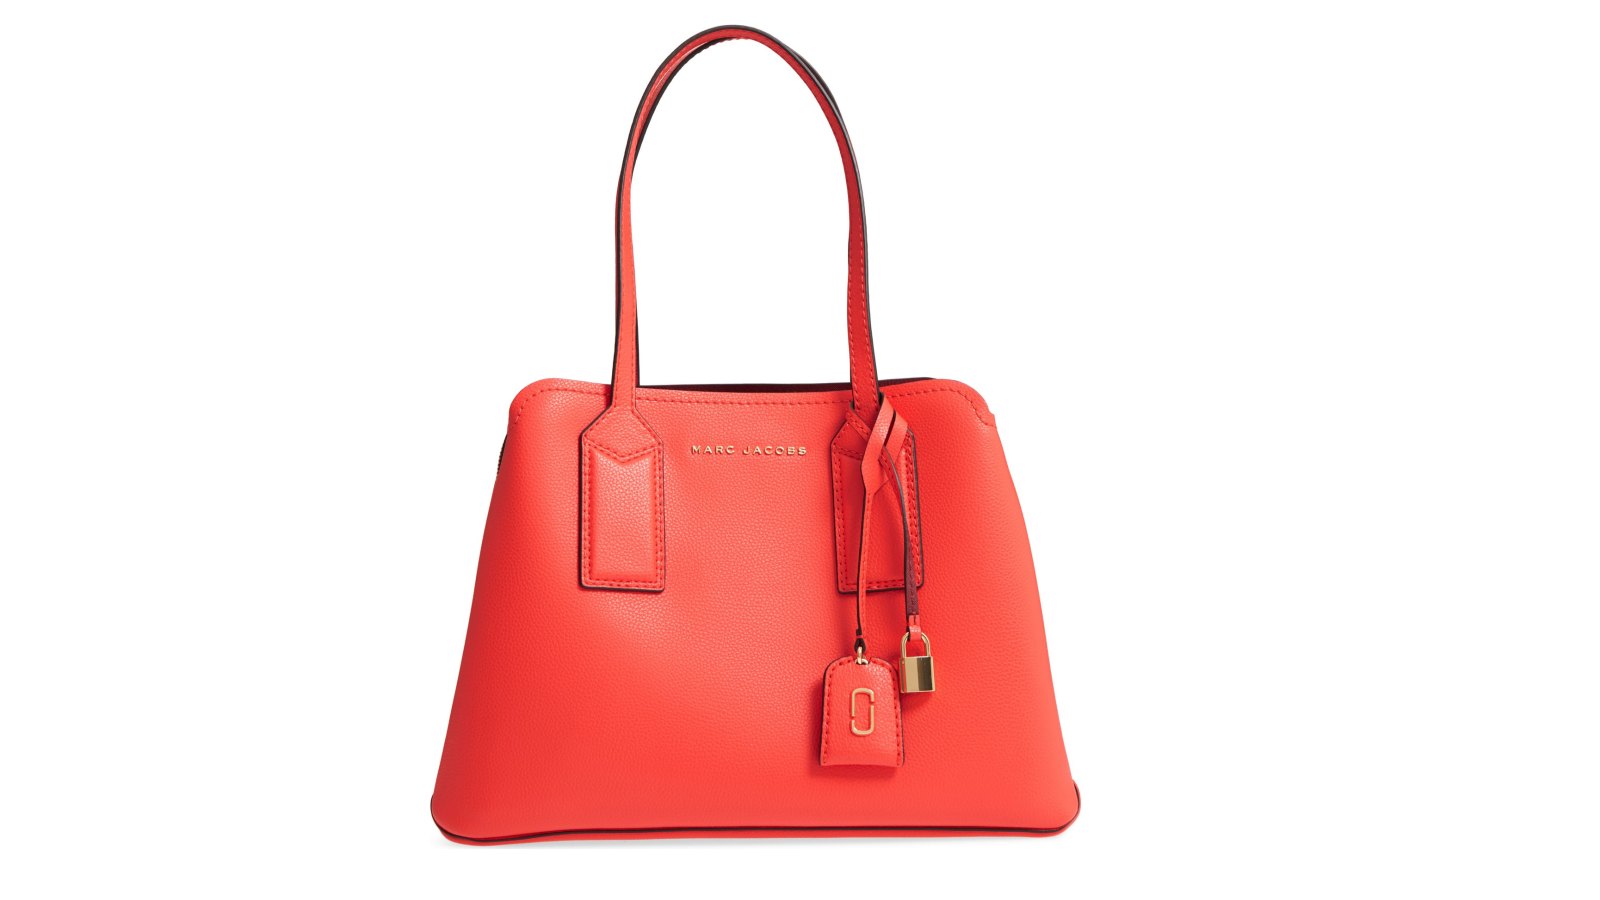 Act Fast: The Iconic Marc Jacobs Tote Bag Is $40 Off During  Prime Day